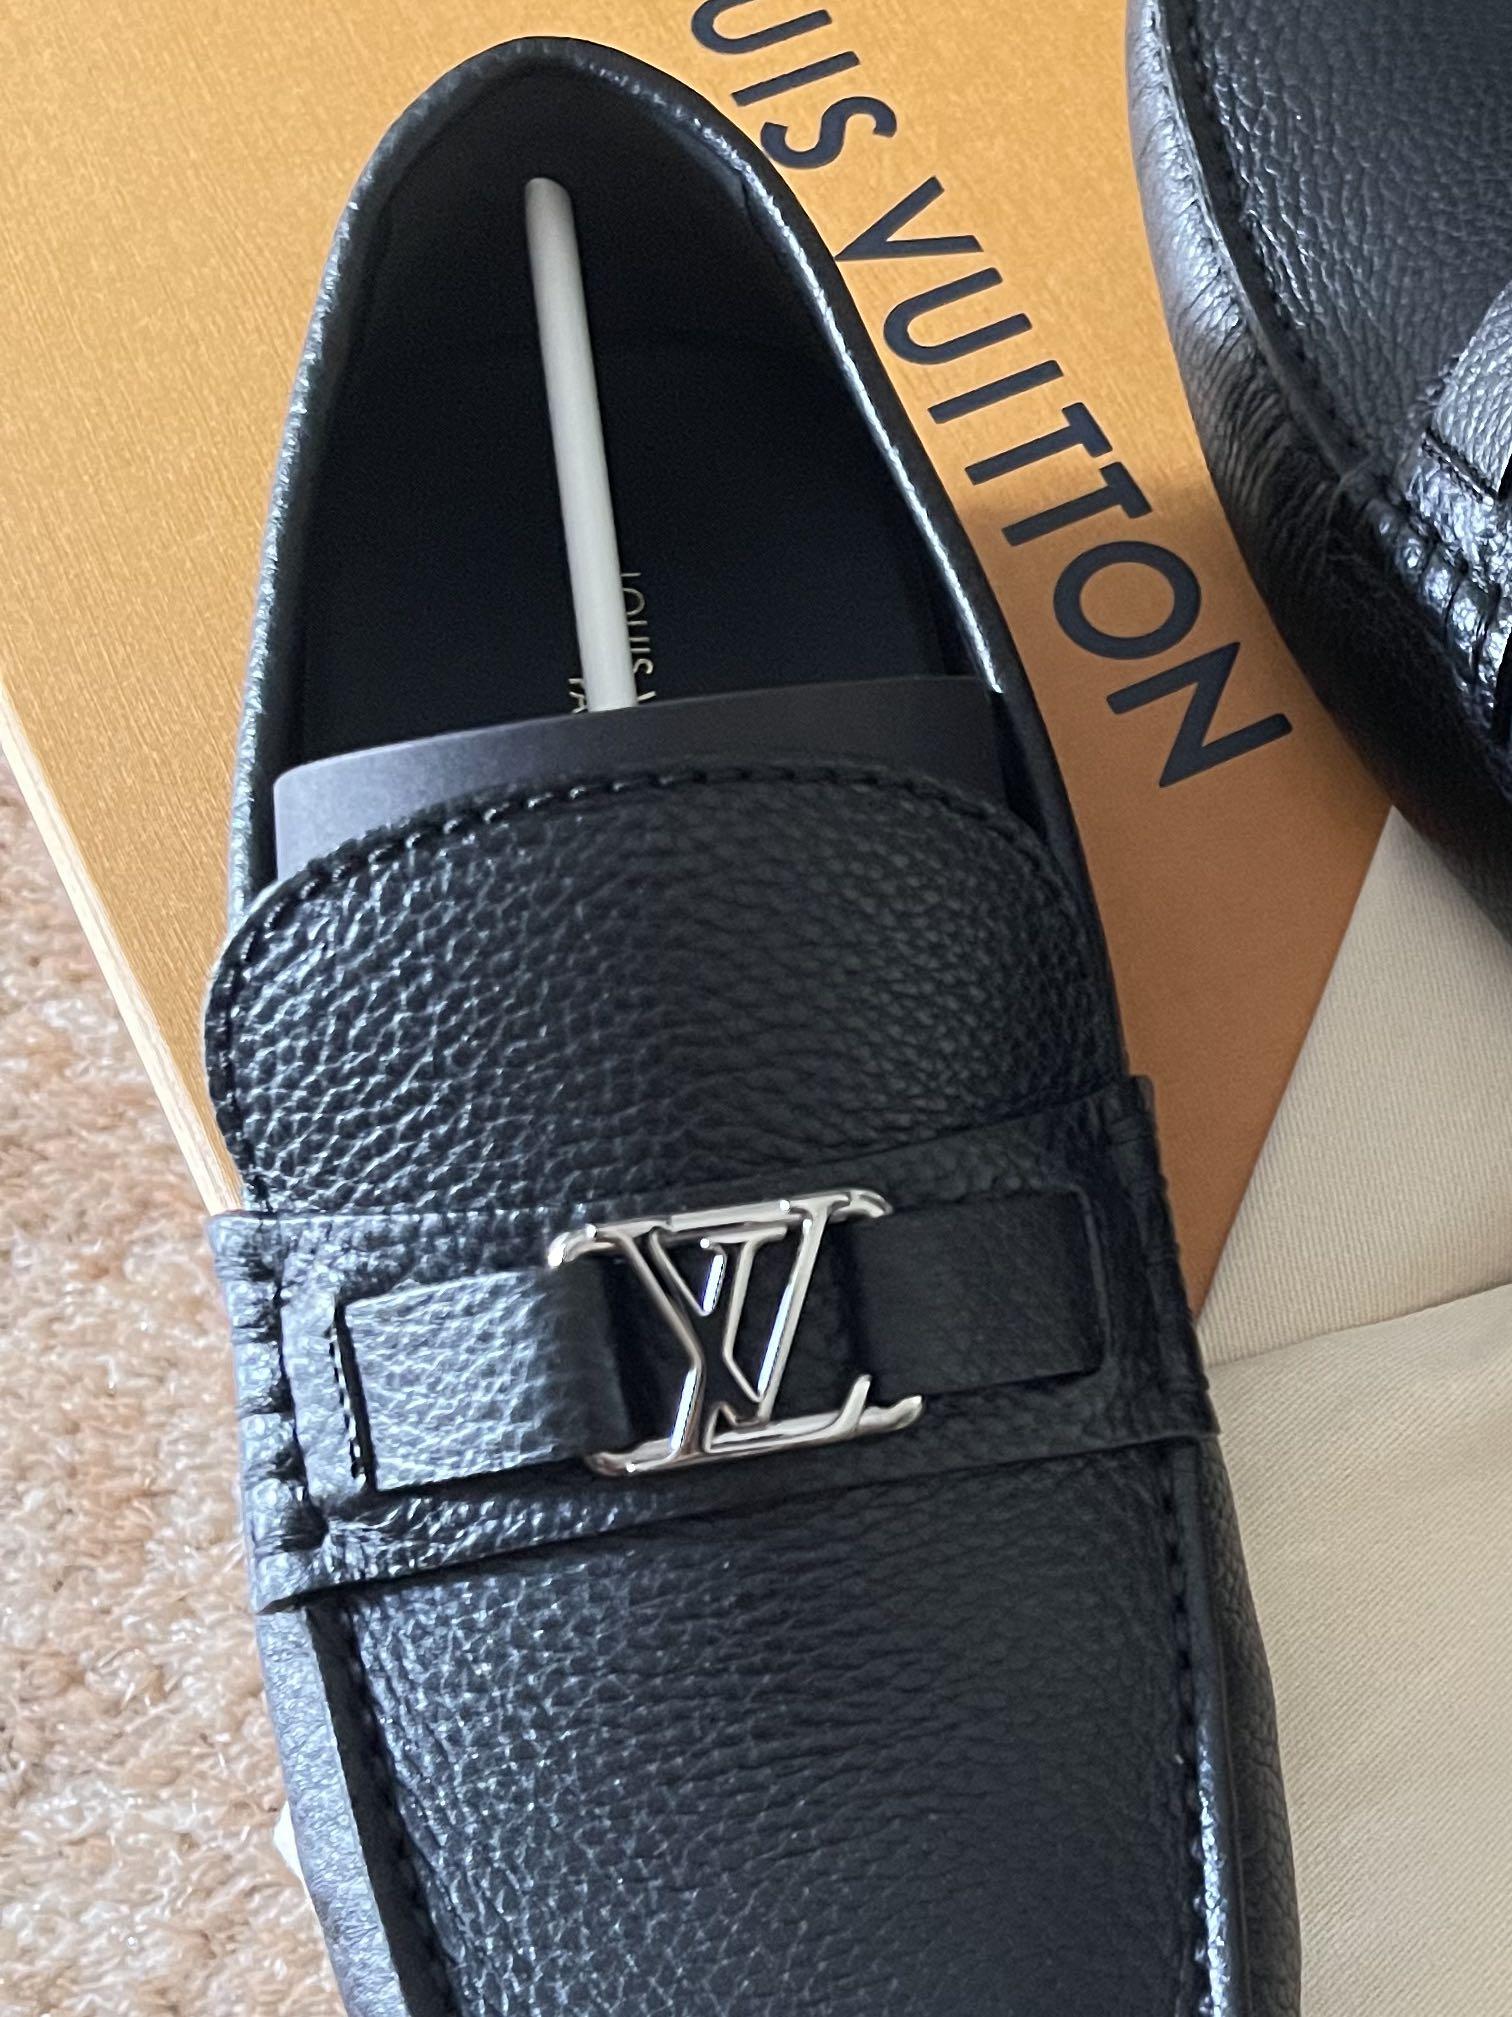 Louis Vuitton Black Leather Lombok Driving Loafers, Size 46 - LabelCentric